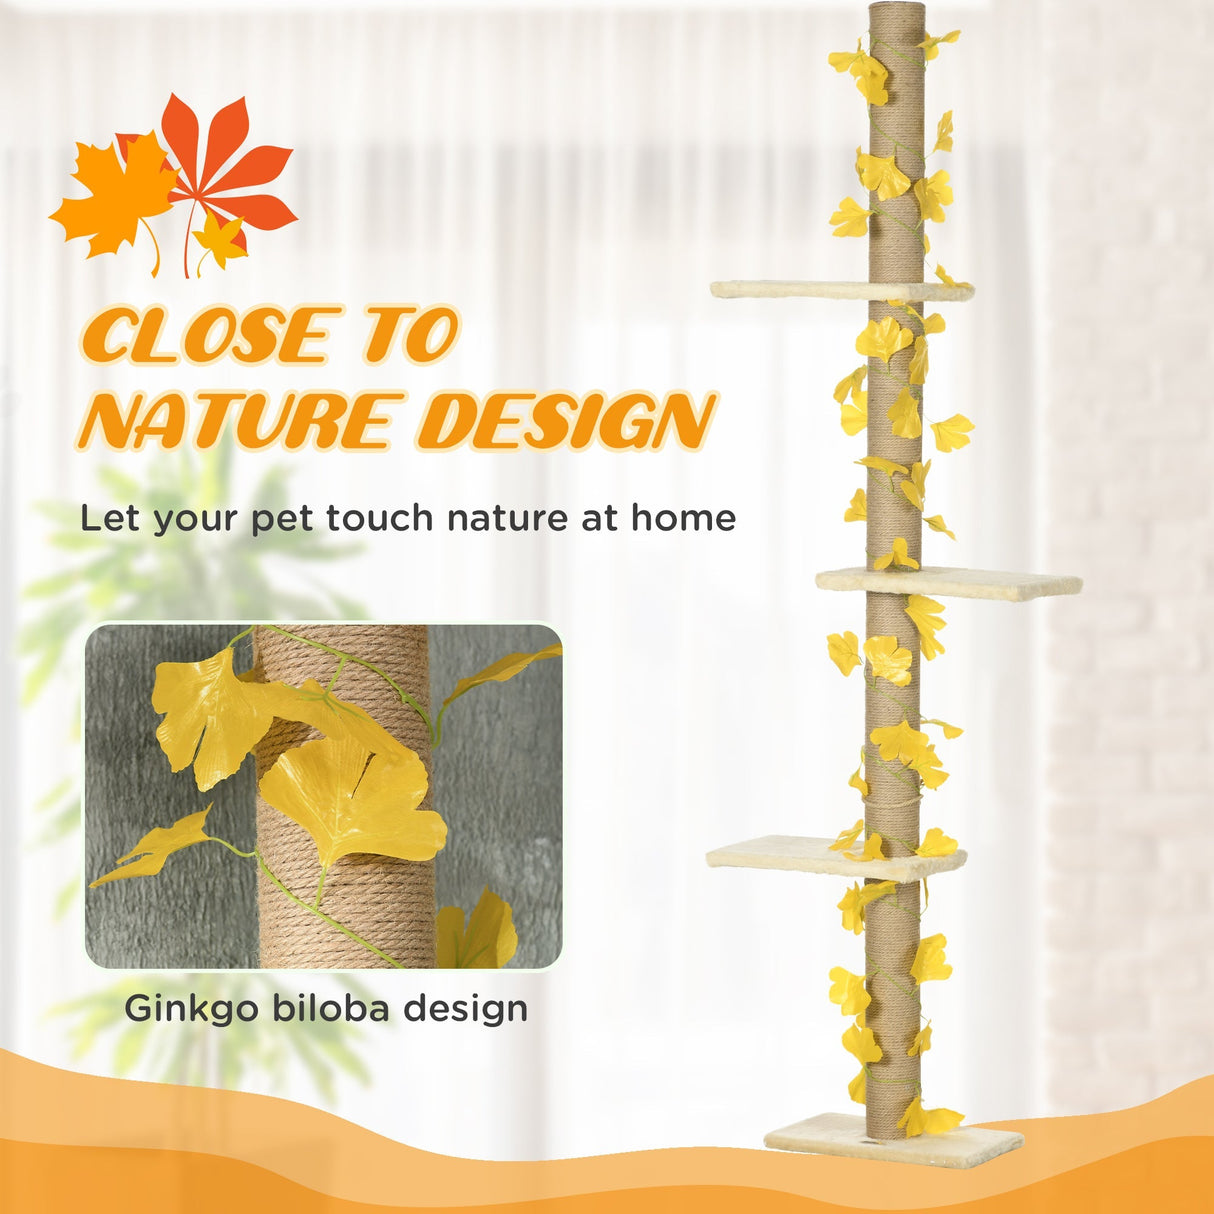 242cm Adjustable Floor-To-Ceiling Cat Tree, with Artificial Decoration, Perches, Anti-Slip Kit, PawHut, Yellow